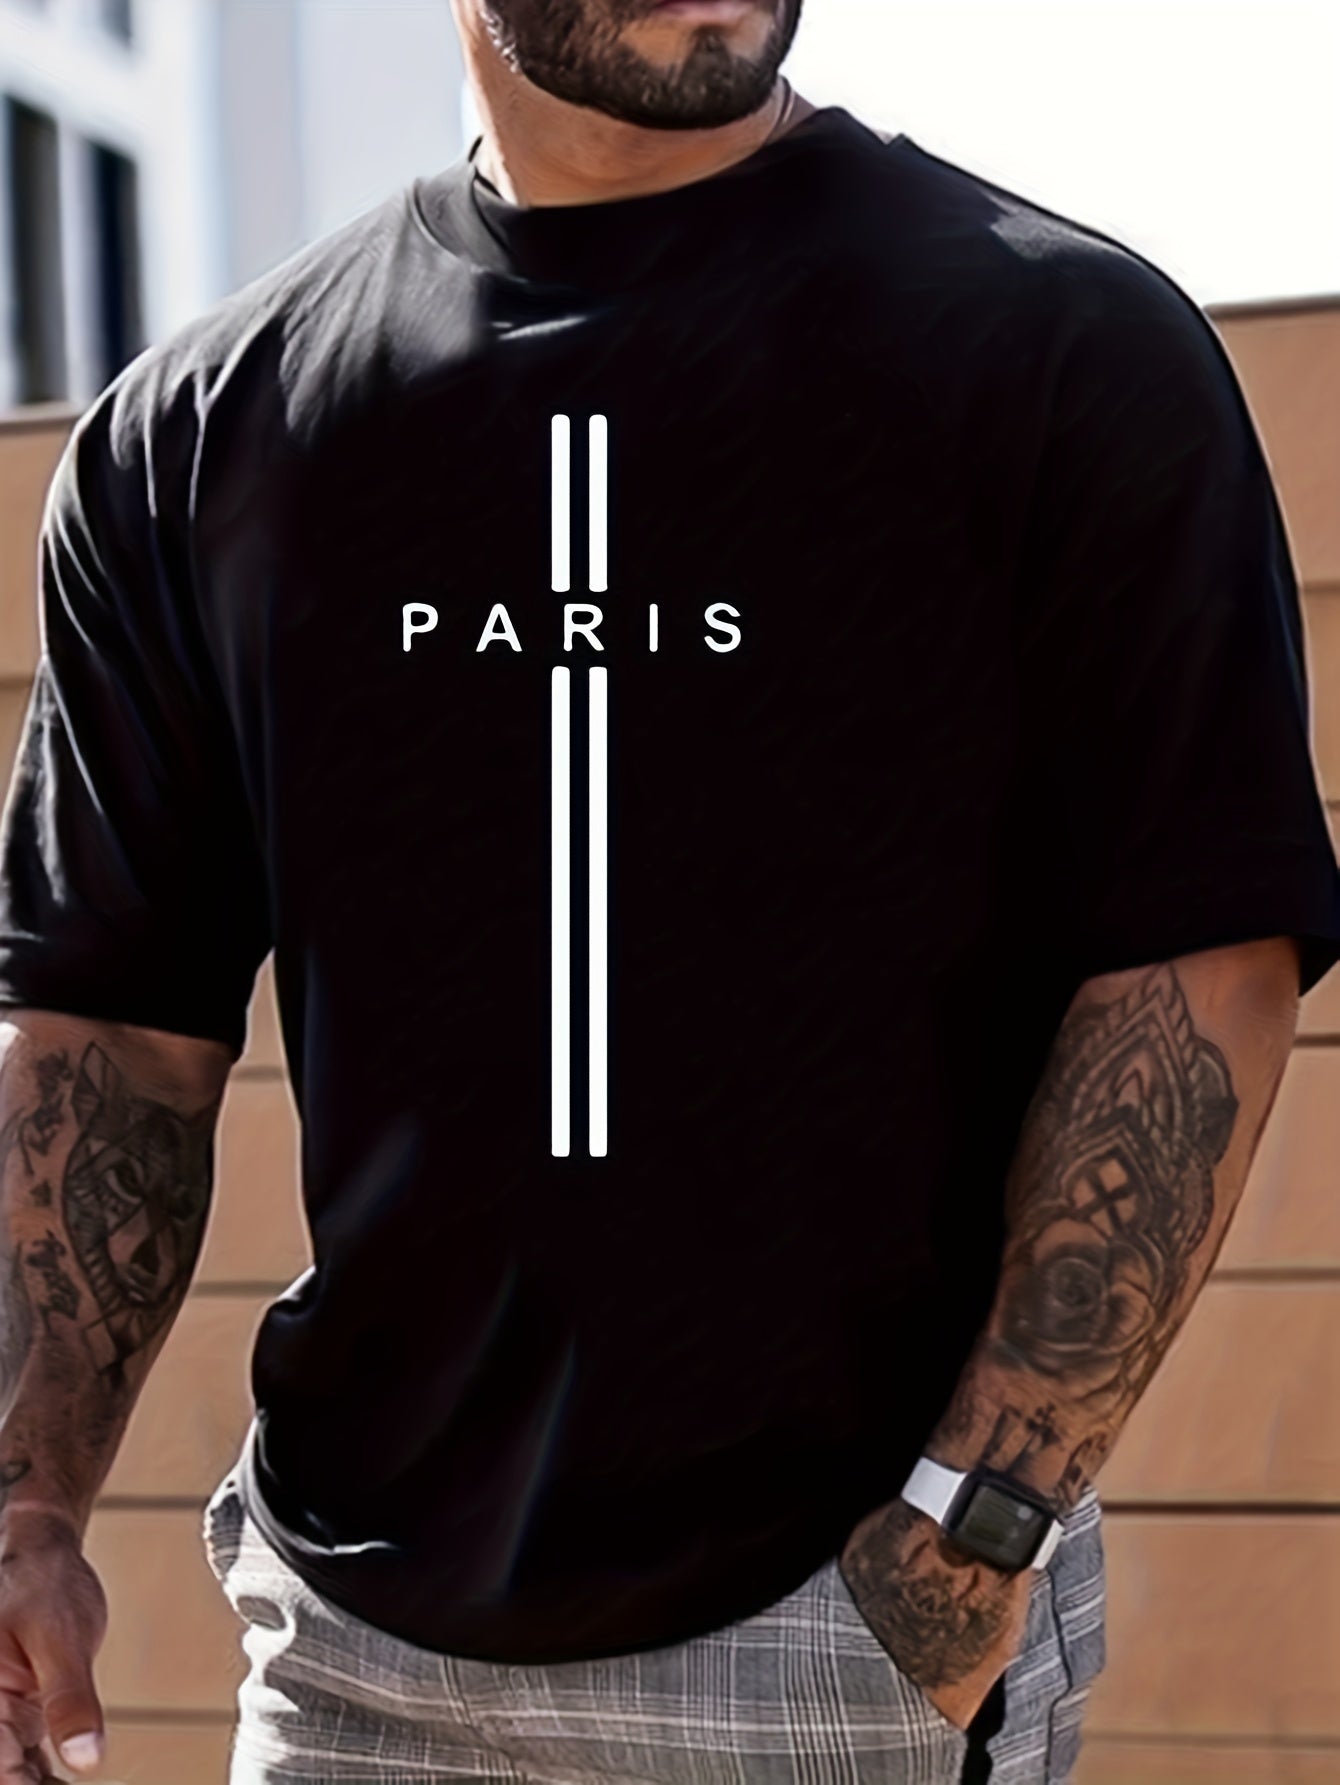 Paris Print, Men's Graphic Design Crew Neck T-shirt, Casual Comfy Tees Tshirts For Summer, Men's Clothing Tops For Daily Vacation Resorts